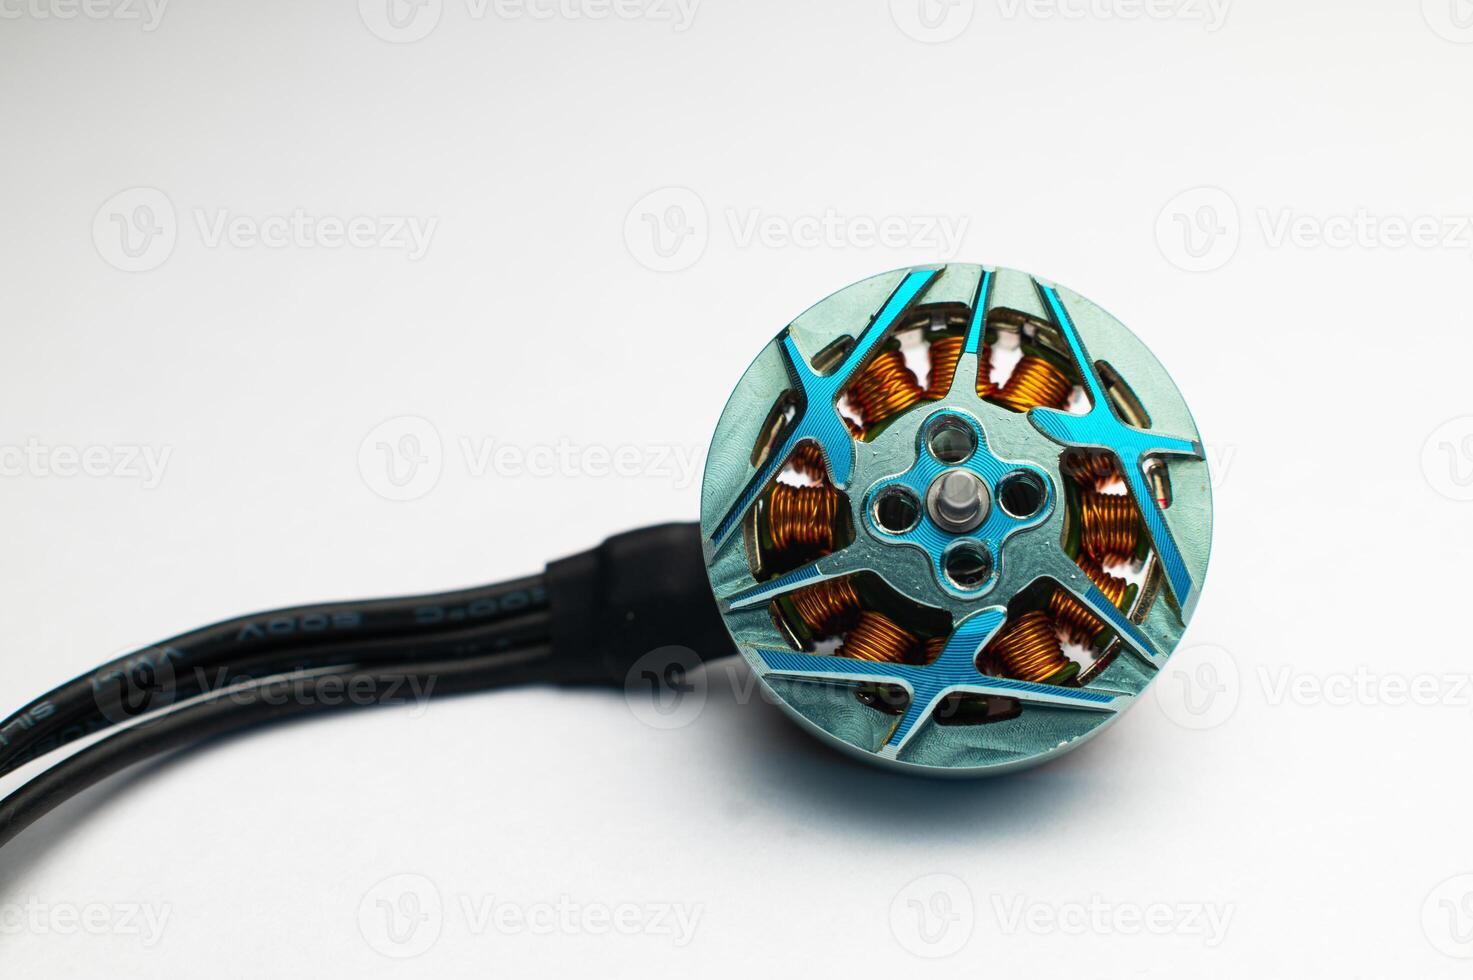 A small brushless motor for assembling an FPV quadcopter. Brushless electric motor photo